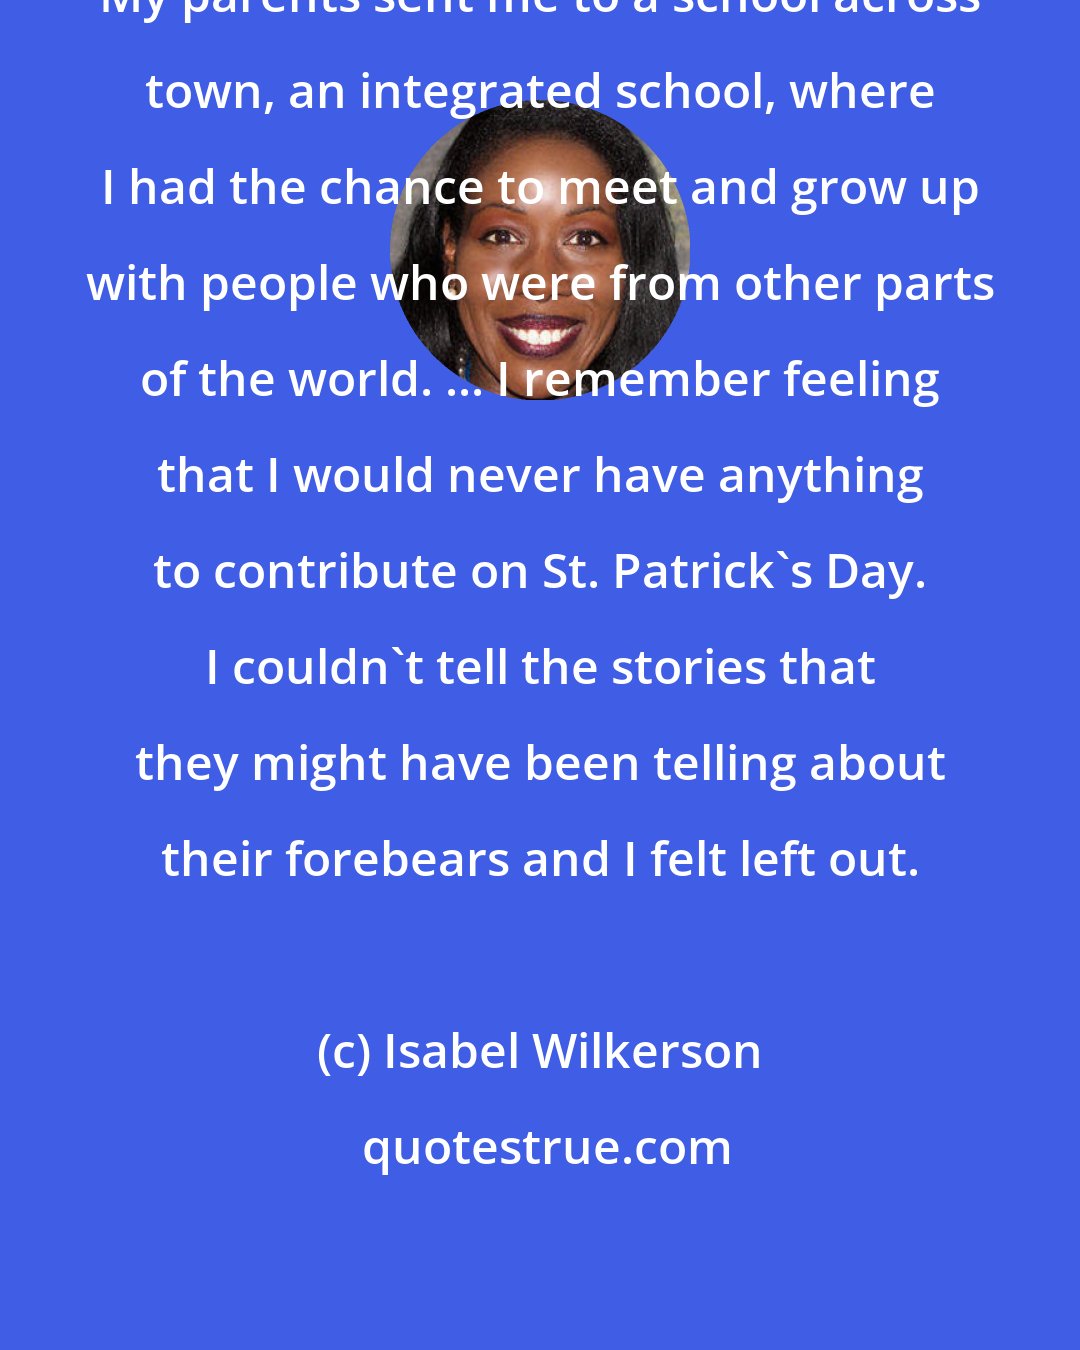 Isabel Wilkerson: My parents sent me to a school across town, an integrated school, where I had the chance to meet and grow up with people who were from other parts of the world. ... I remember feeling that I would never have anything to contribute on St. Patrick's Day. I couldn't tell the stories that they might have been telling about their forebears and I felt left out.